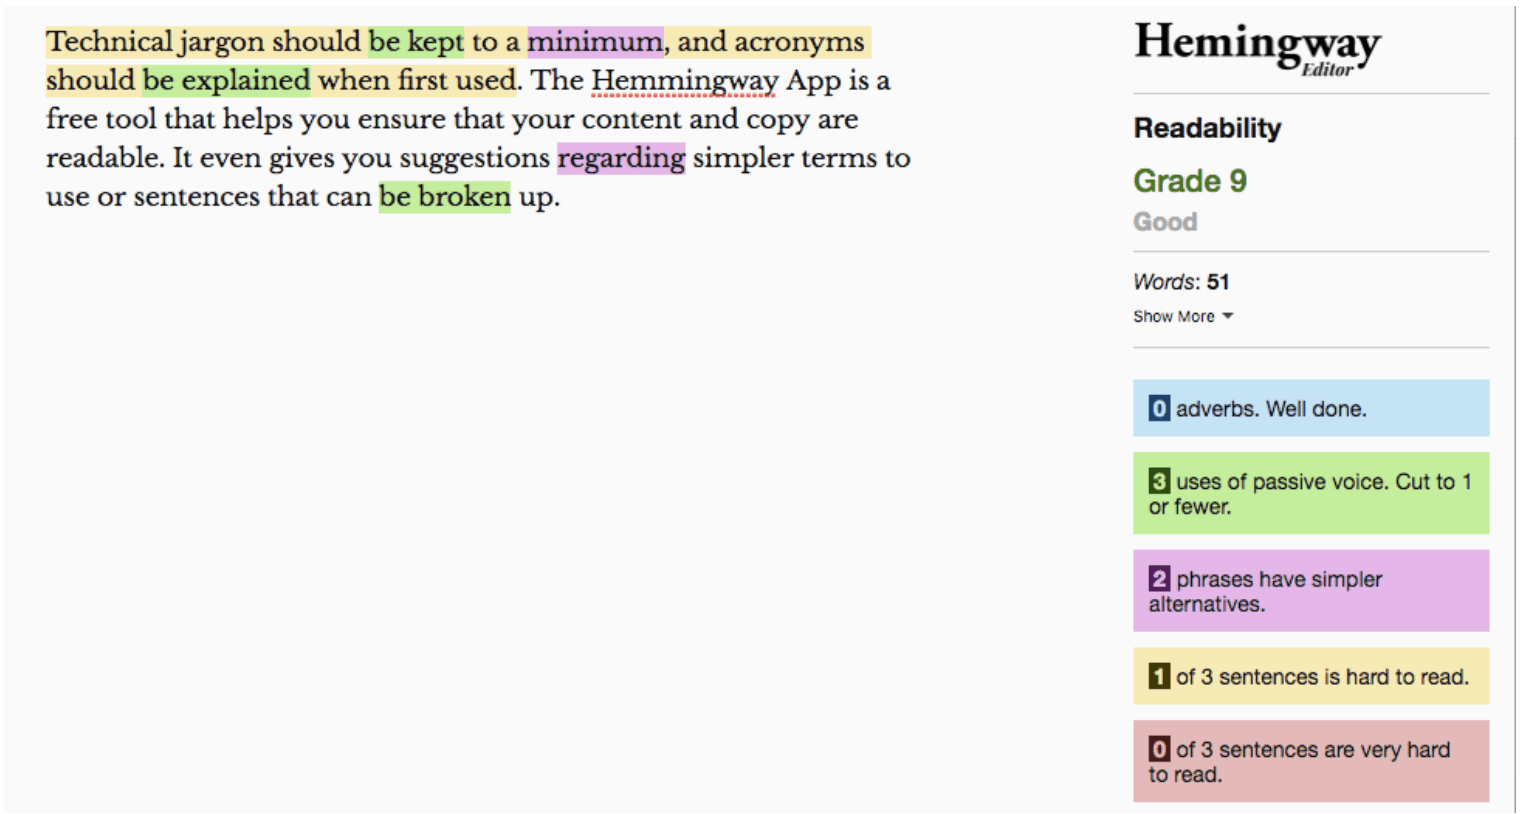 The Hemmingway App is a free tool that helps you make content and copy more readable.